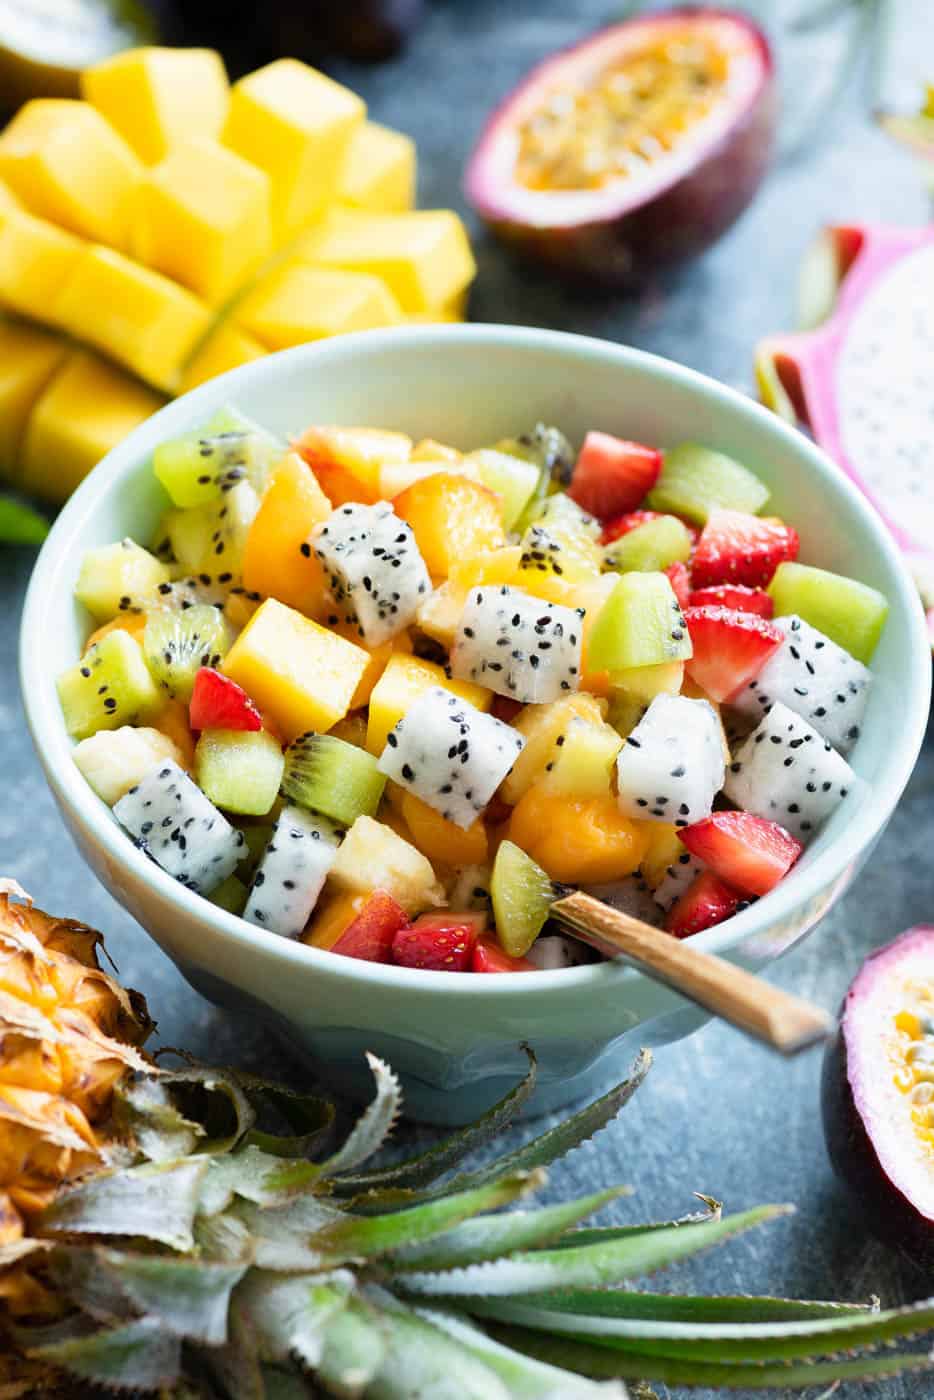 Mexican Fruit Salad with cubed melon, mango, jicama, dragon fruit, lime juice, and a hint of spicy chili - served in a blue bowl.